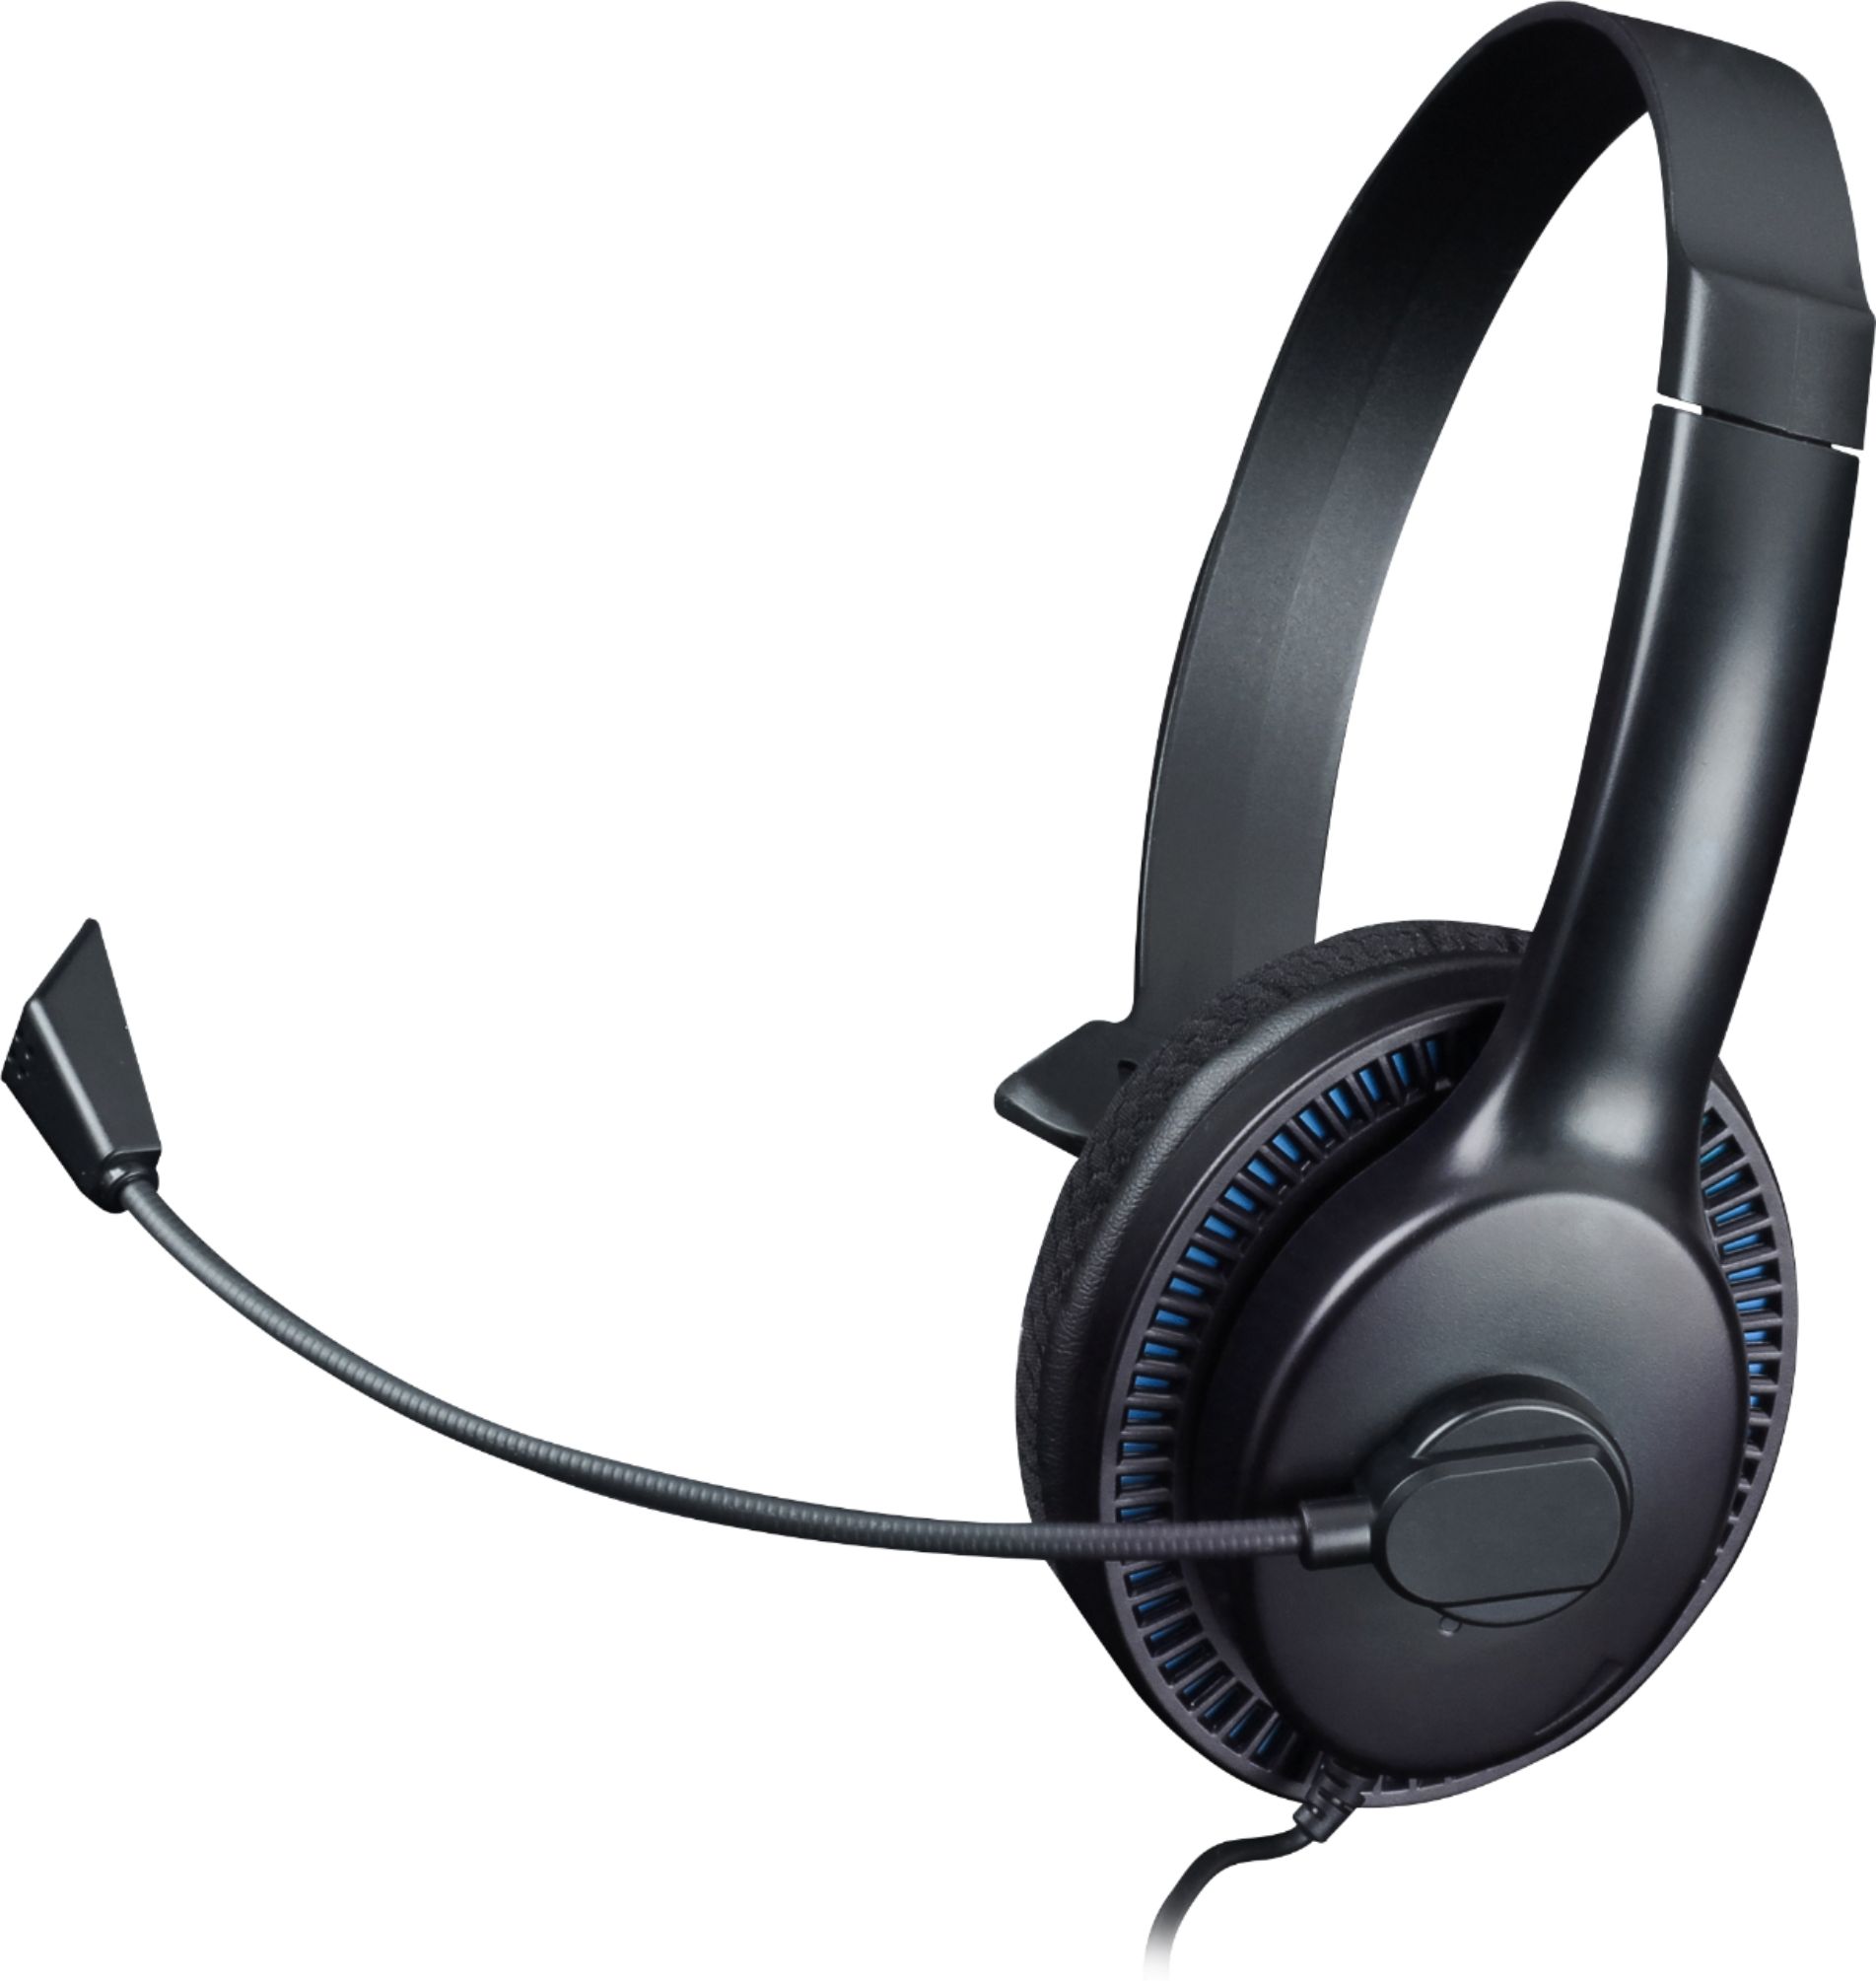 playstation 4 chat headset